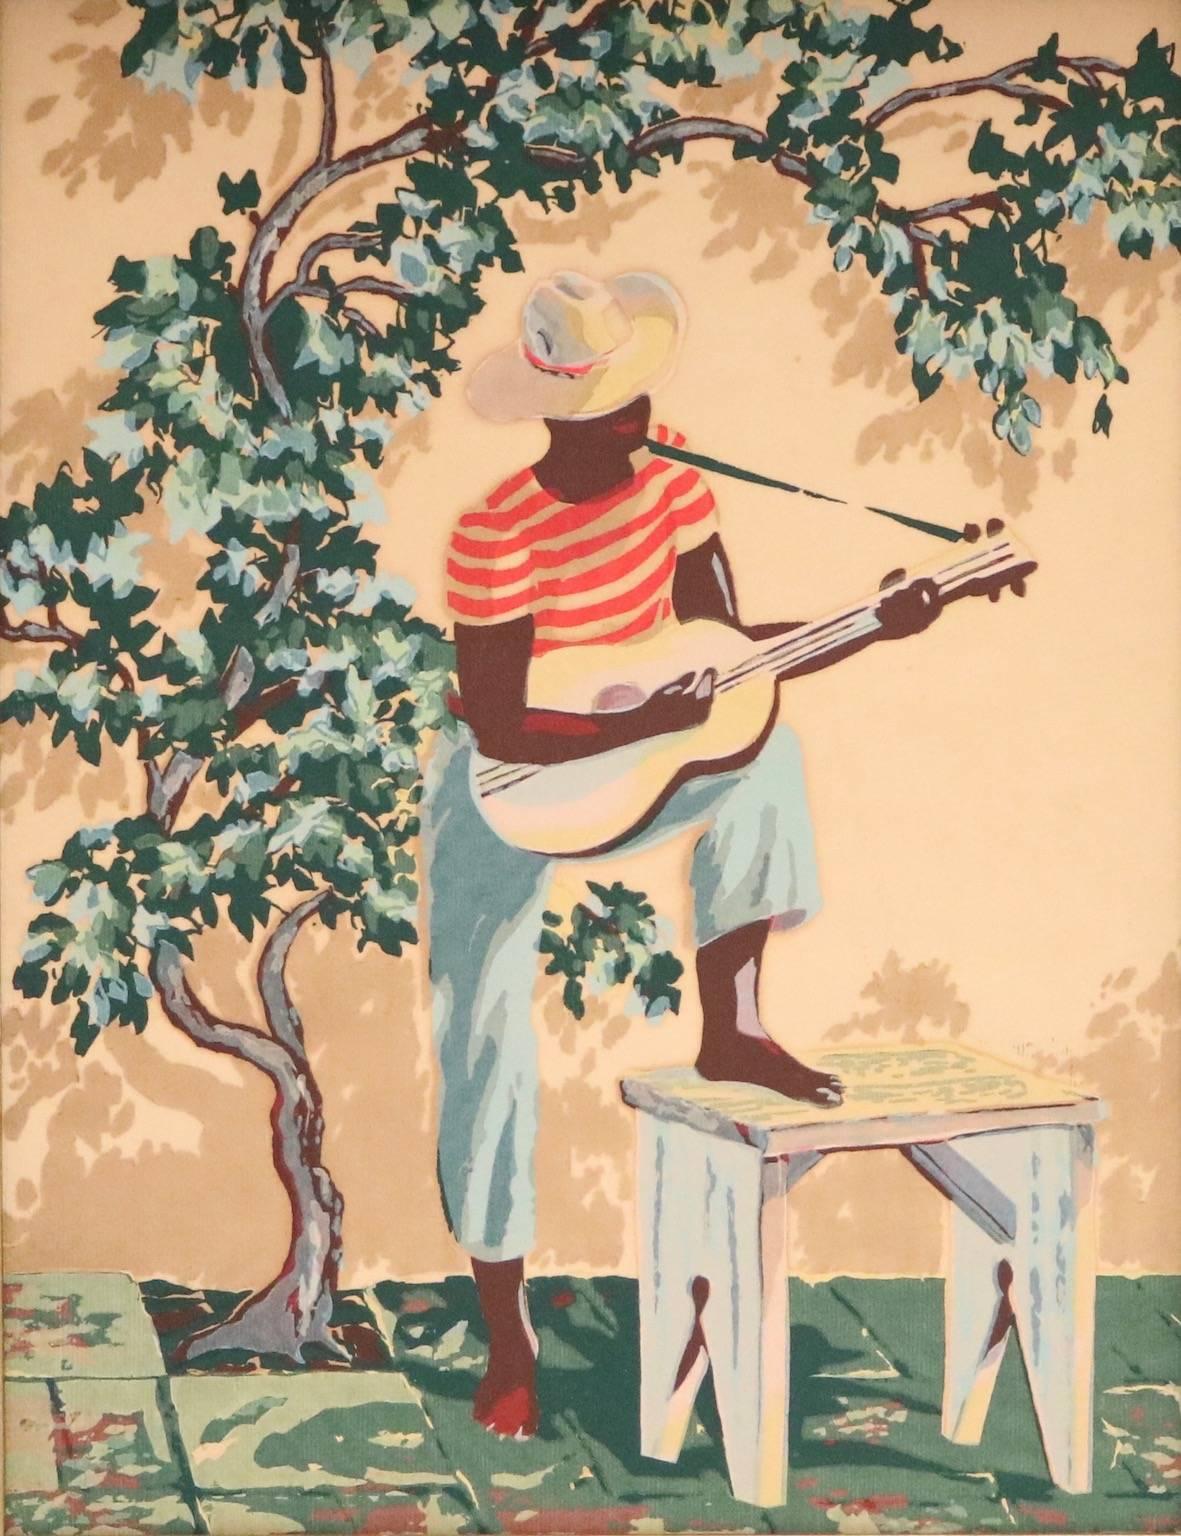 Pair of circa 1940s framed pochoir prints on paper, depicting tropical Caribbean settings featuring festively dressed African-American couple, one with a man playing the guitar the other a woman with a basket of flowers balanced on her head.